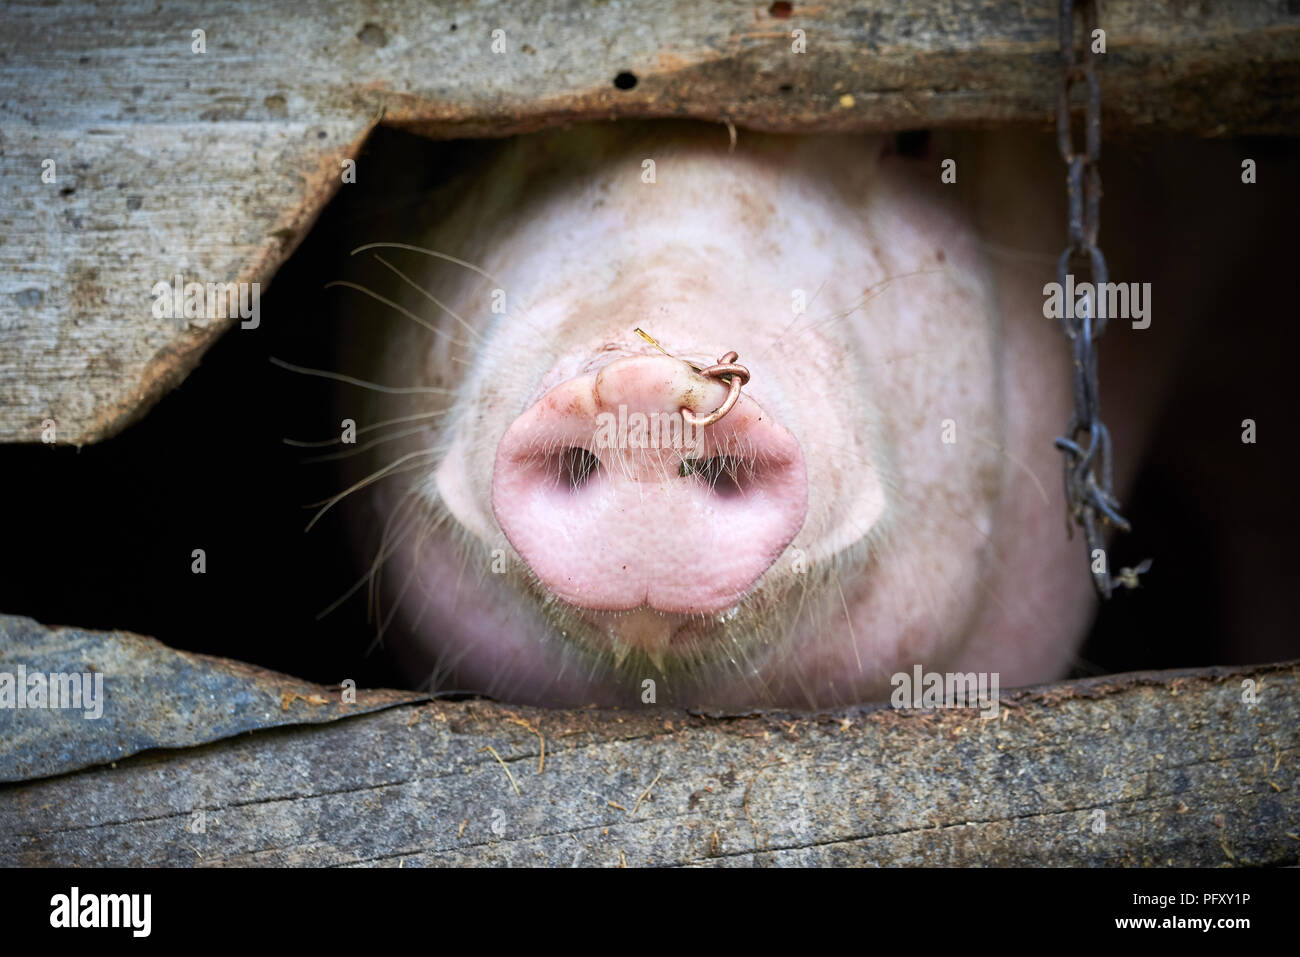 Domestic pig snout Stock Photo